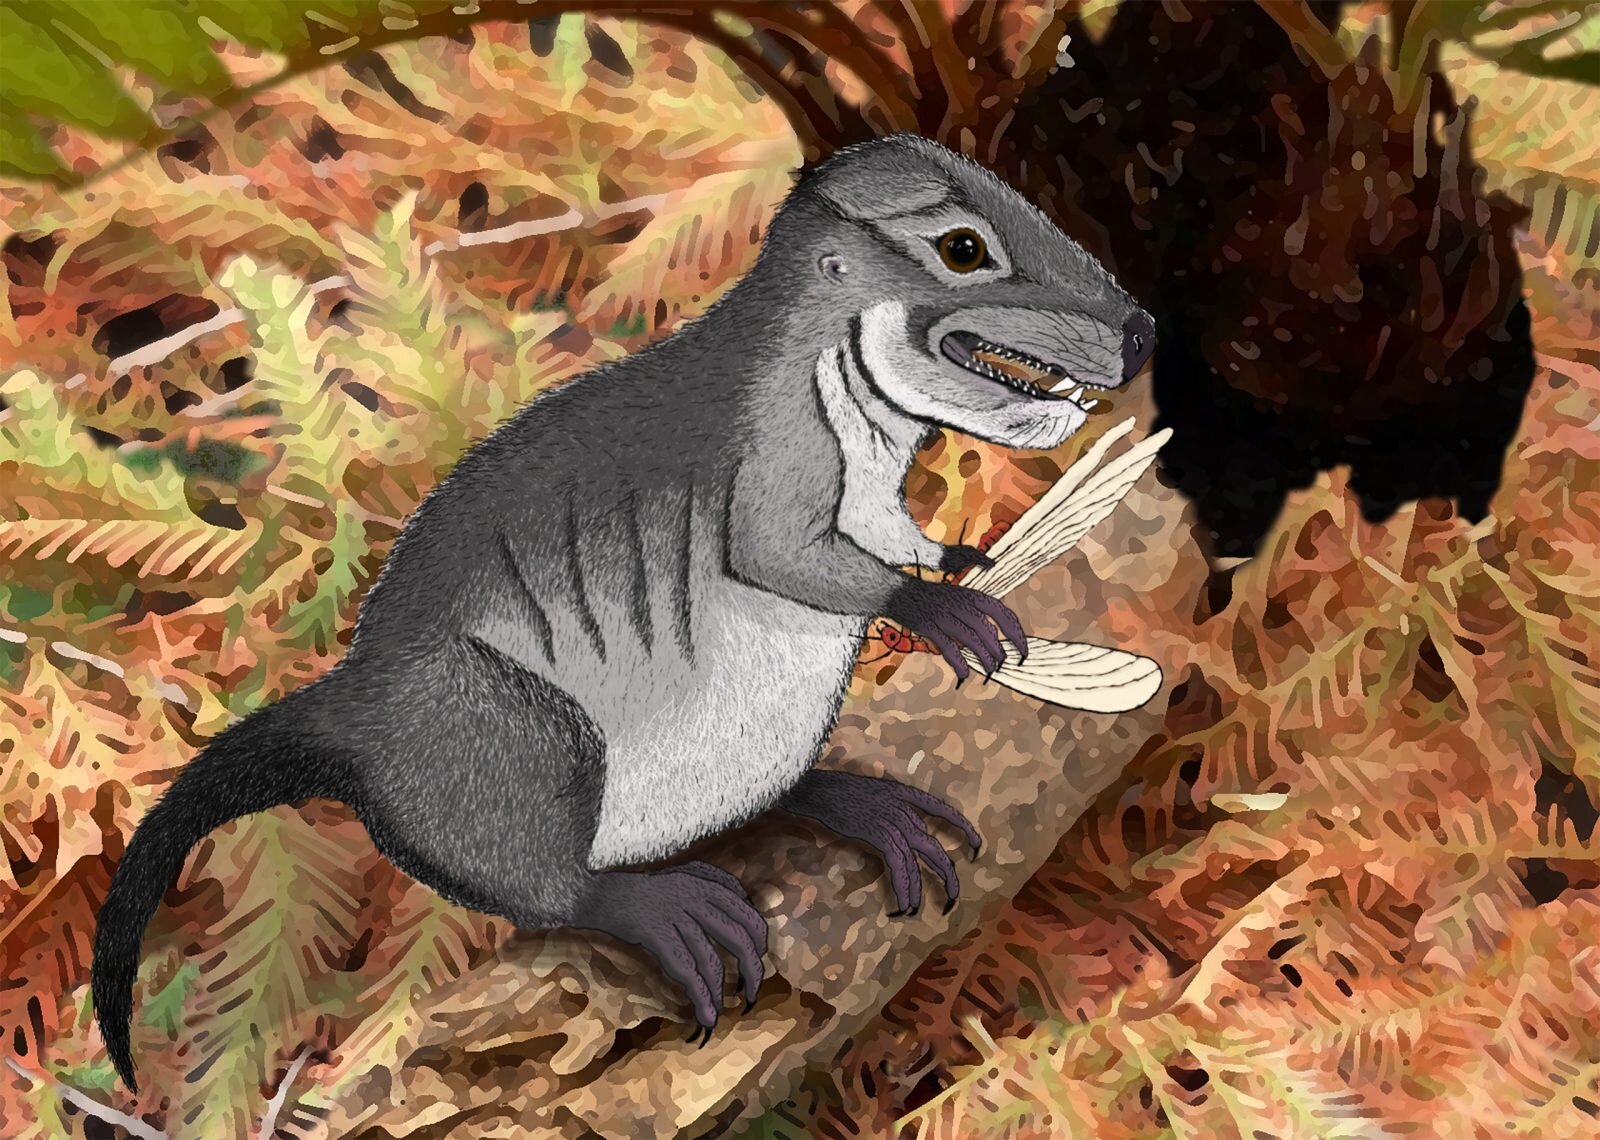 New species of ancient cynodont, 220 million years old, discovered